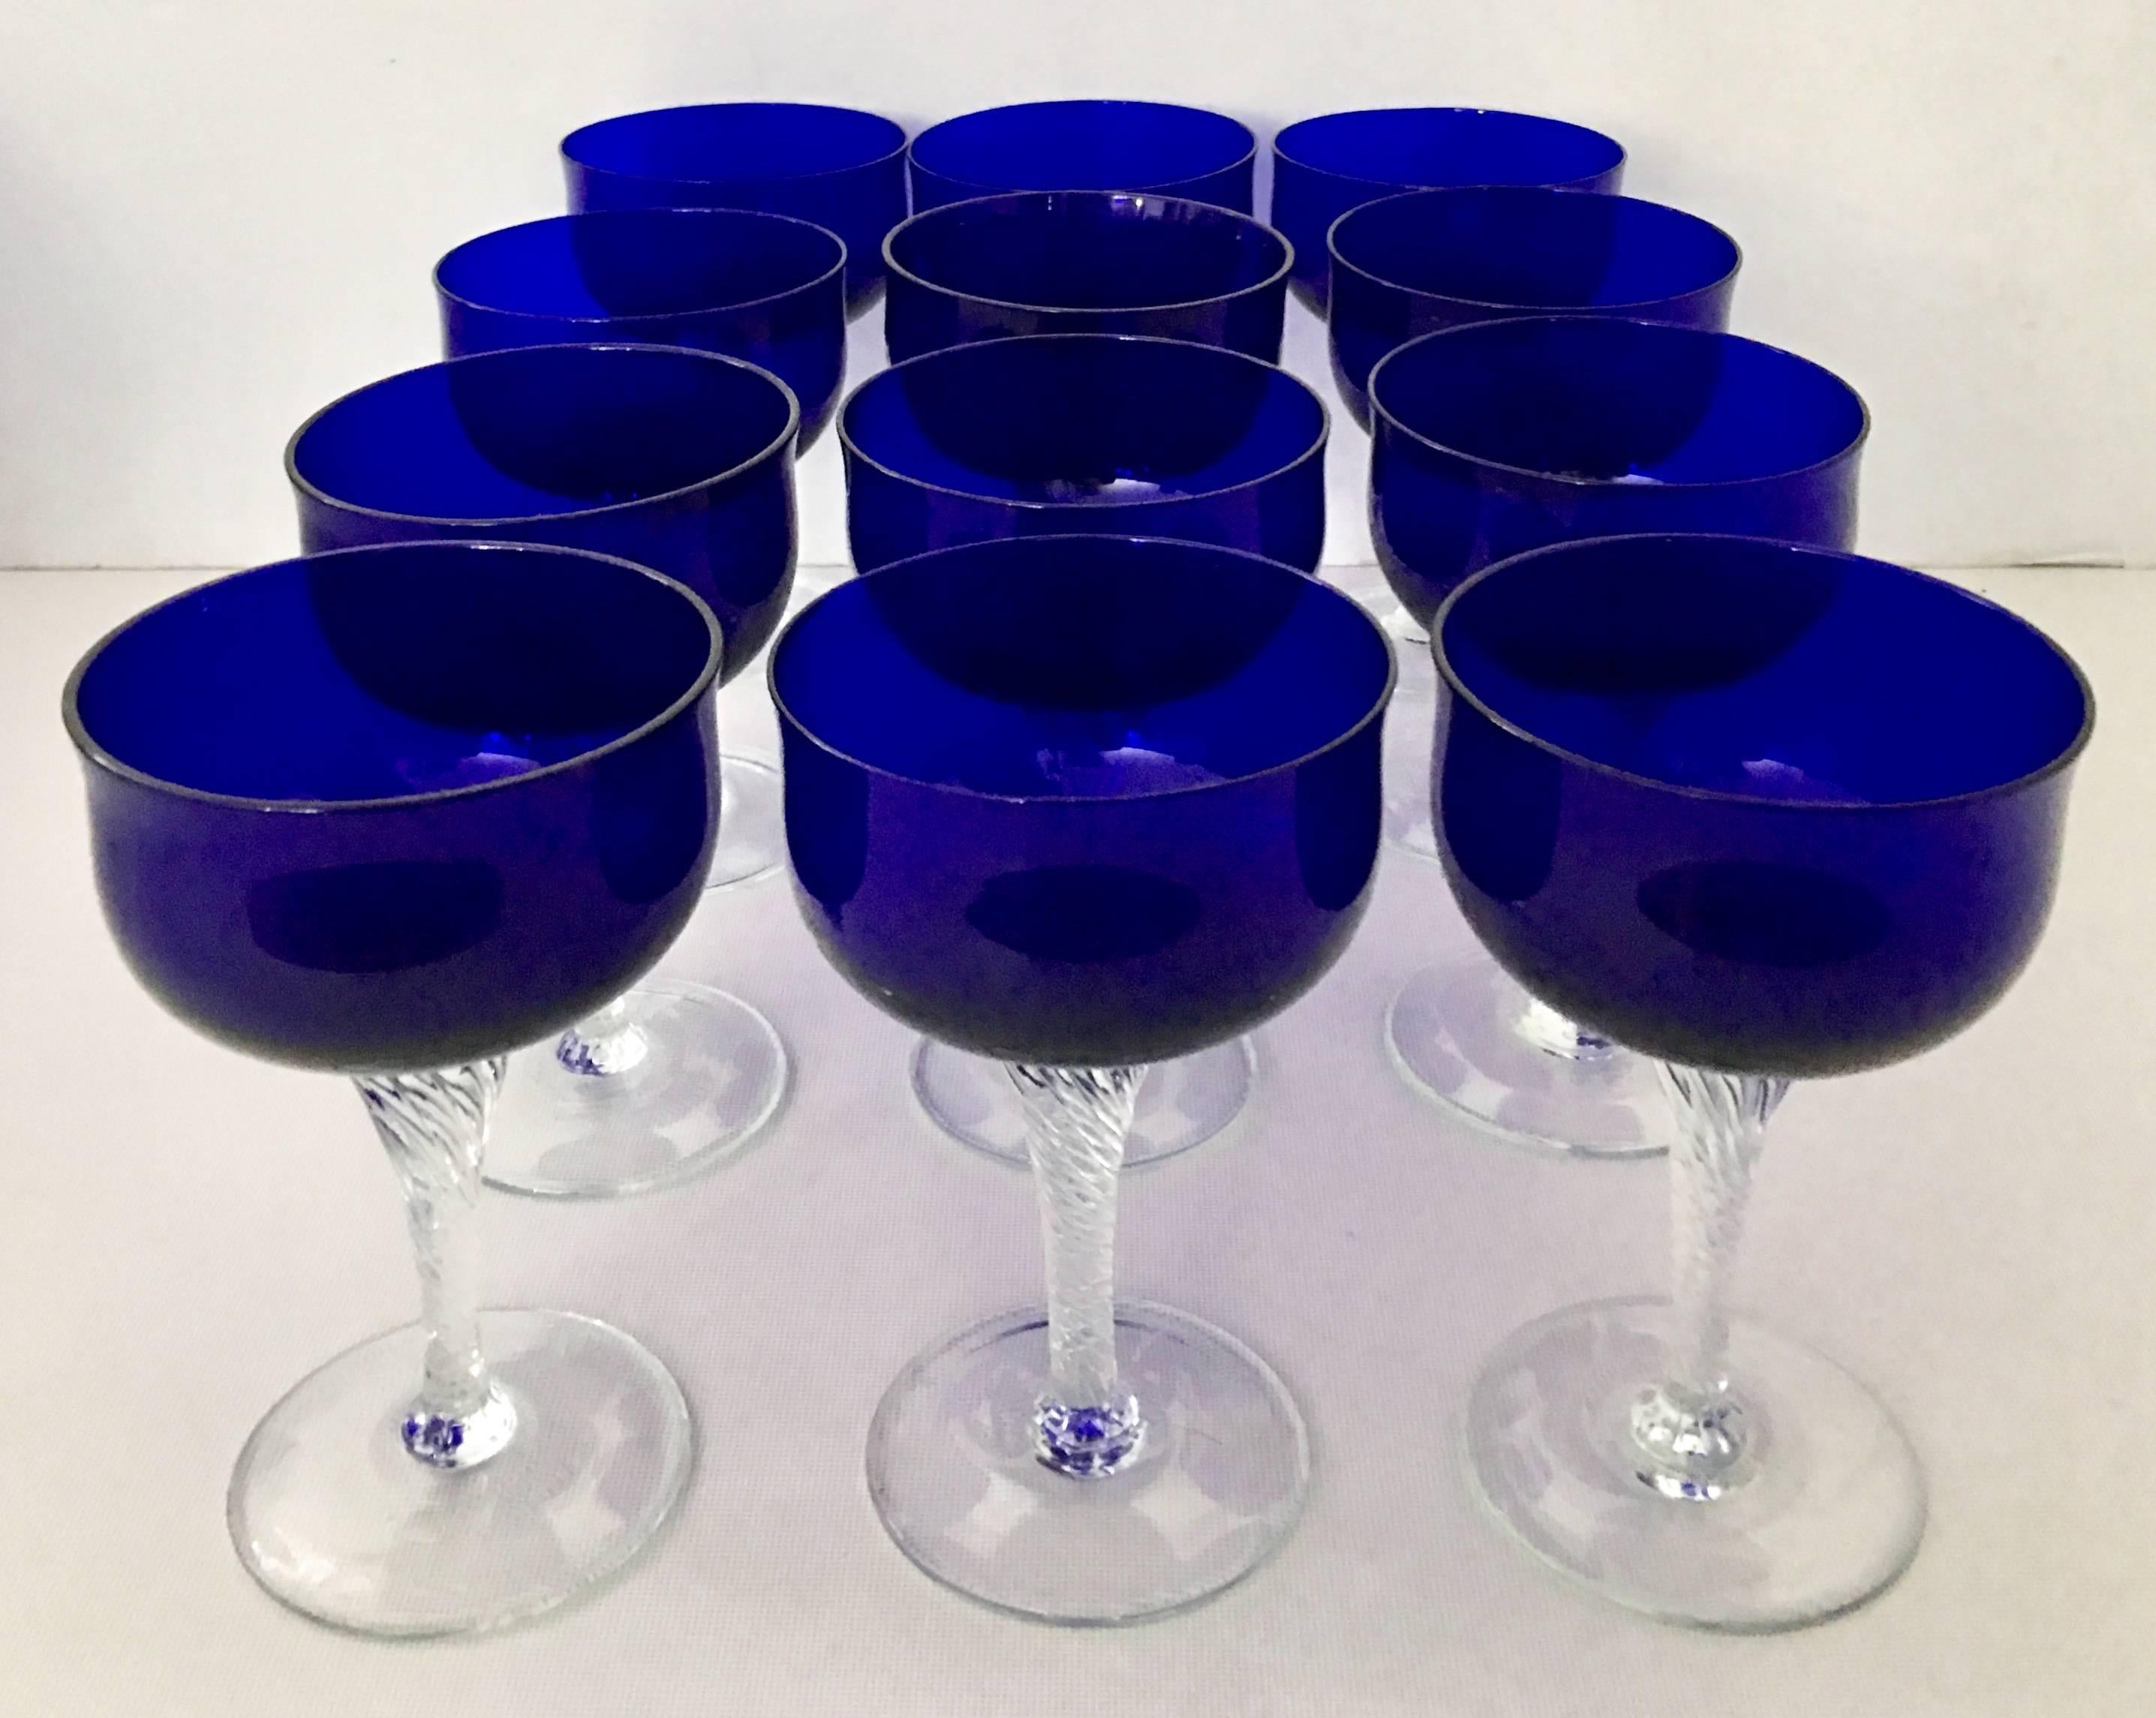 20th Century cobalt to clear coupe crystal stem glasses, set of 12 pieces by Sasaki.
These 12 coupe crystal glasses are in the 